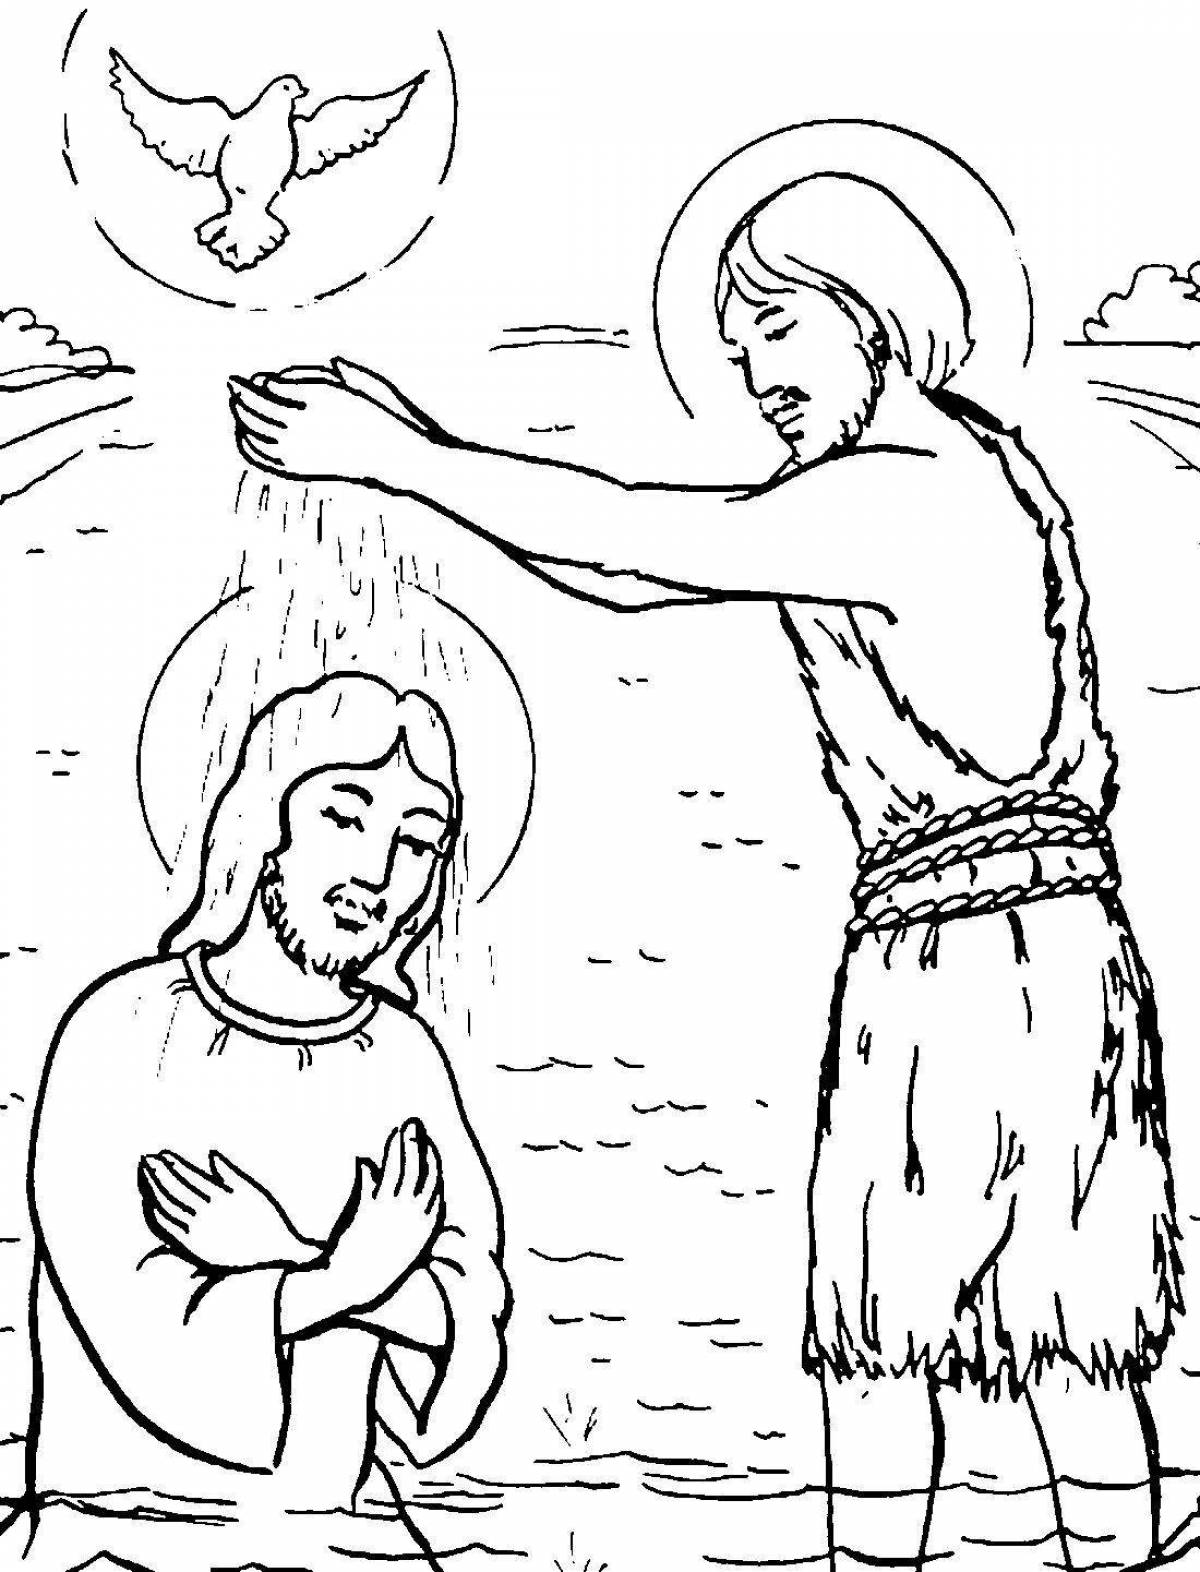 Coloring for the baptism of jesus christ for children